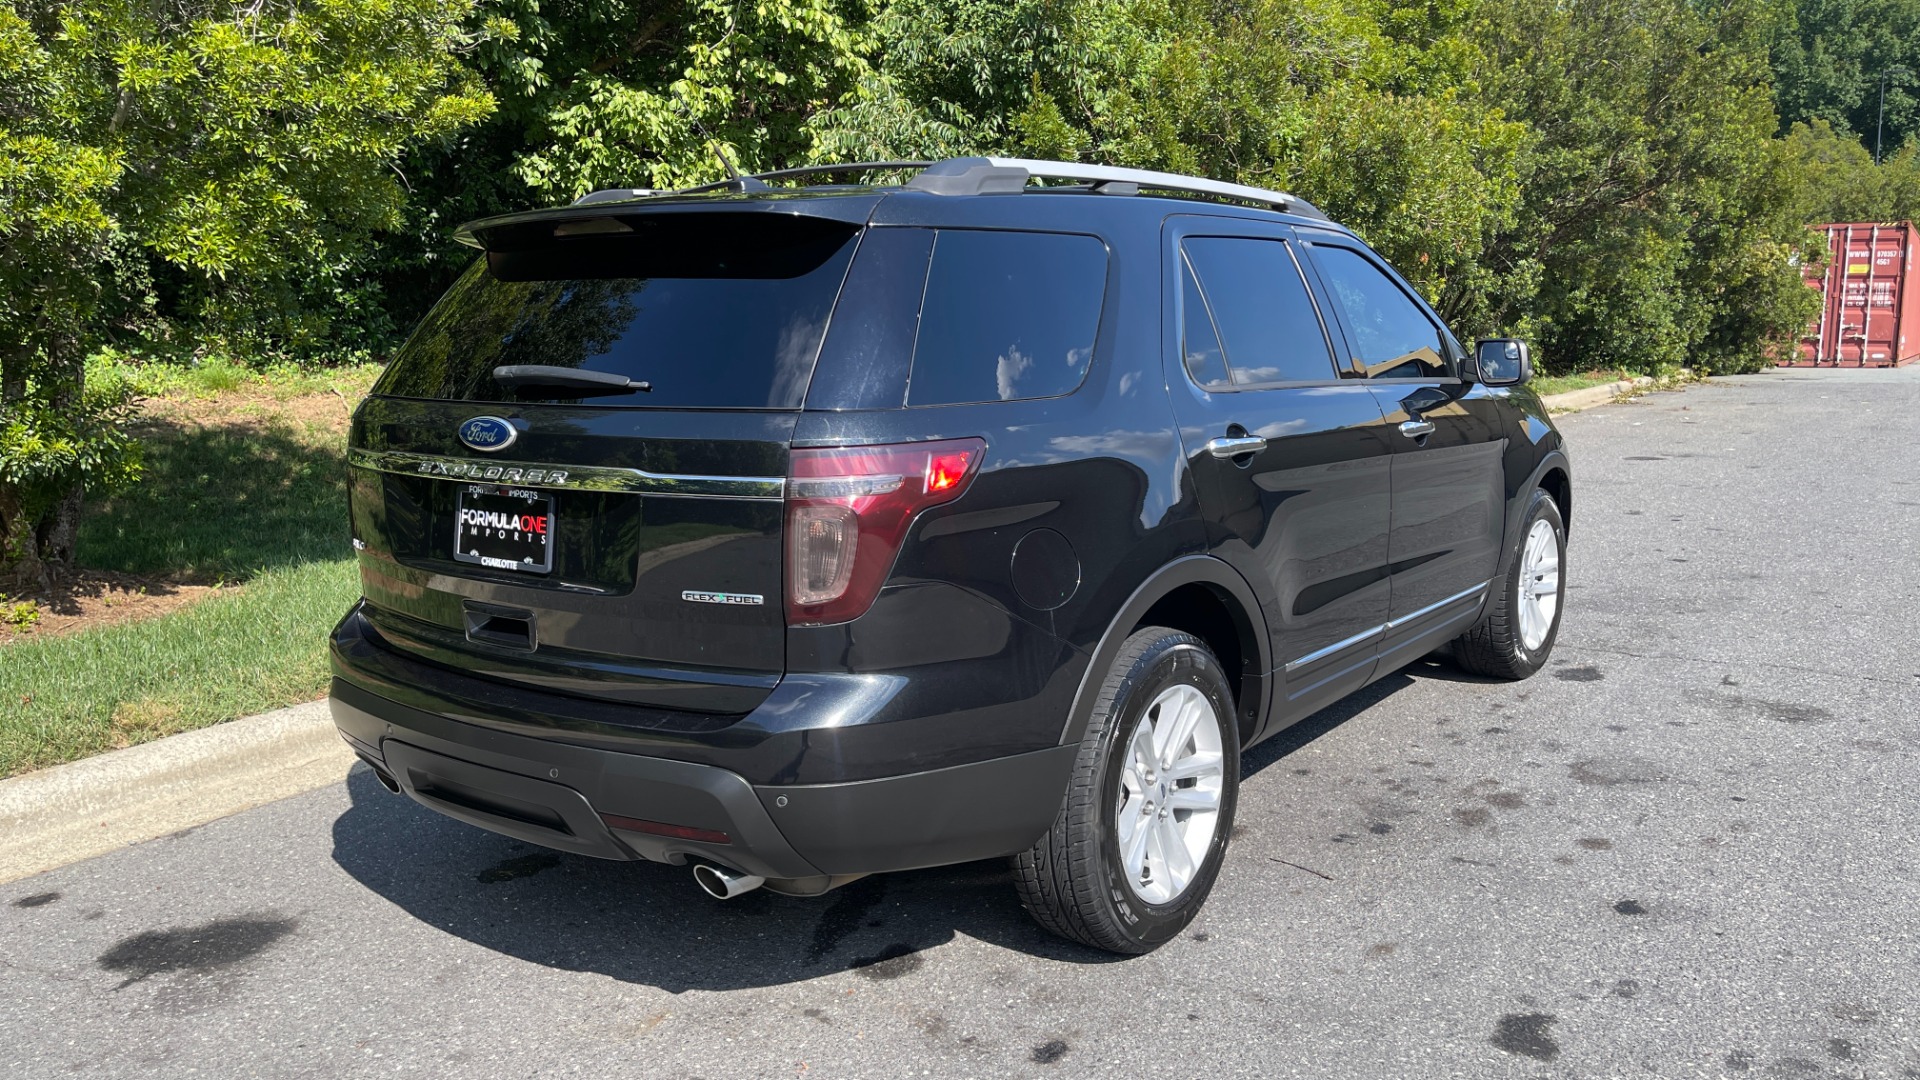 Used 2013 Ford Explorer XLT / LEATHER / COMFORT PACKAGE / 3.5 V6 / REAR VIEW CAMERA / DRIVER CONNEC for sale $13,995 at Formula Imports in Charlotte NC 28227 10